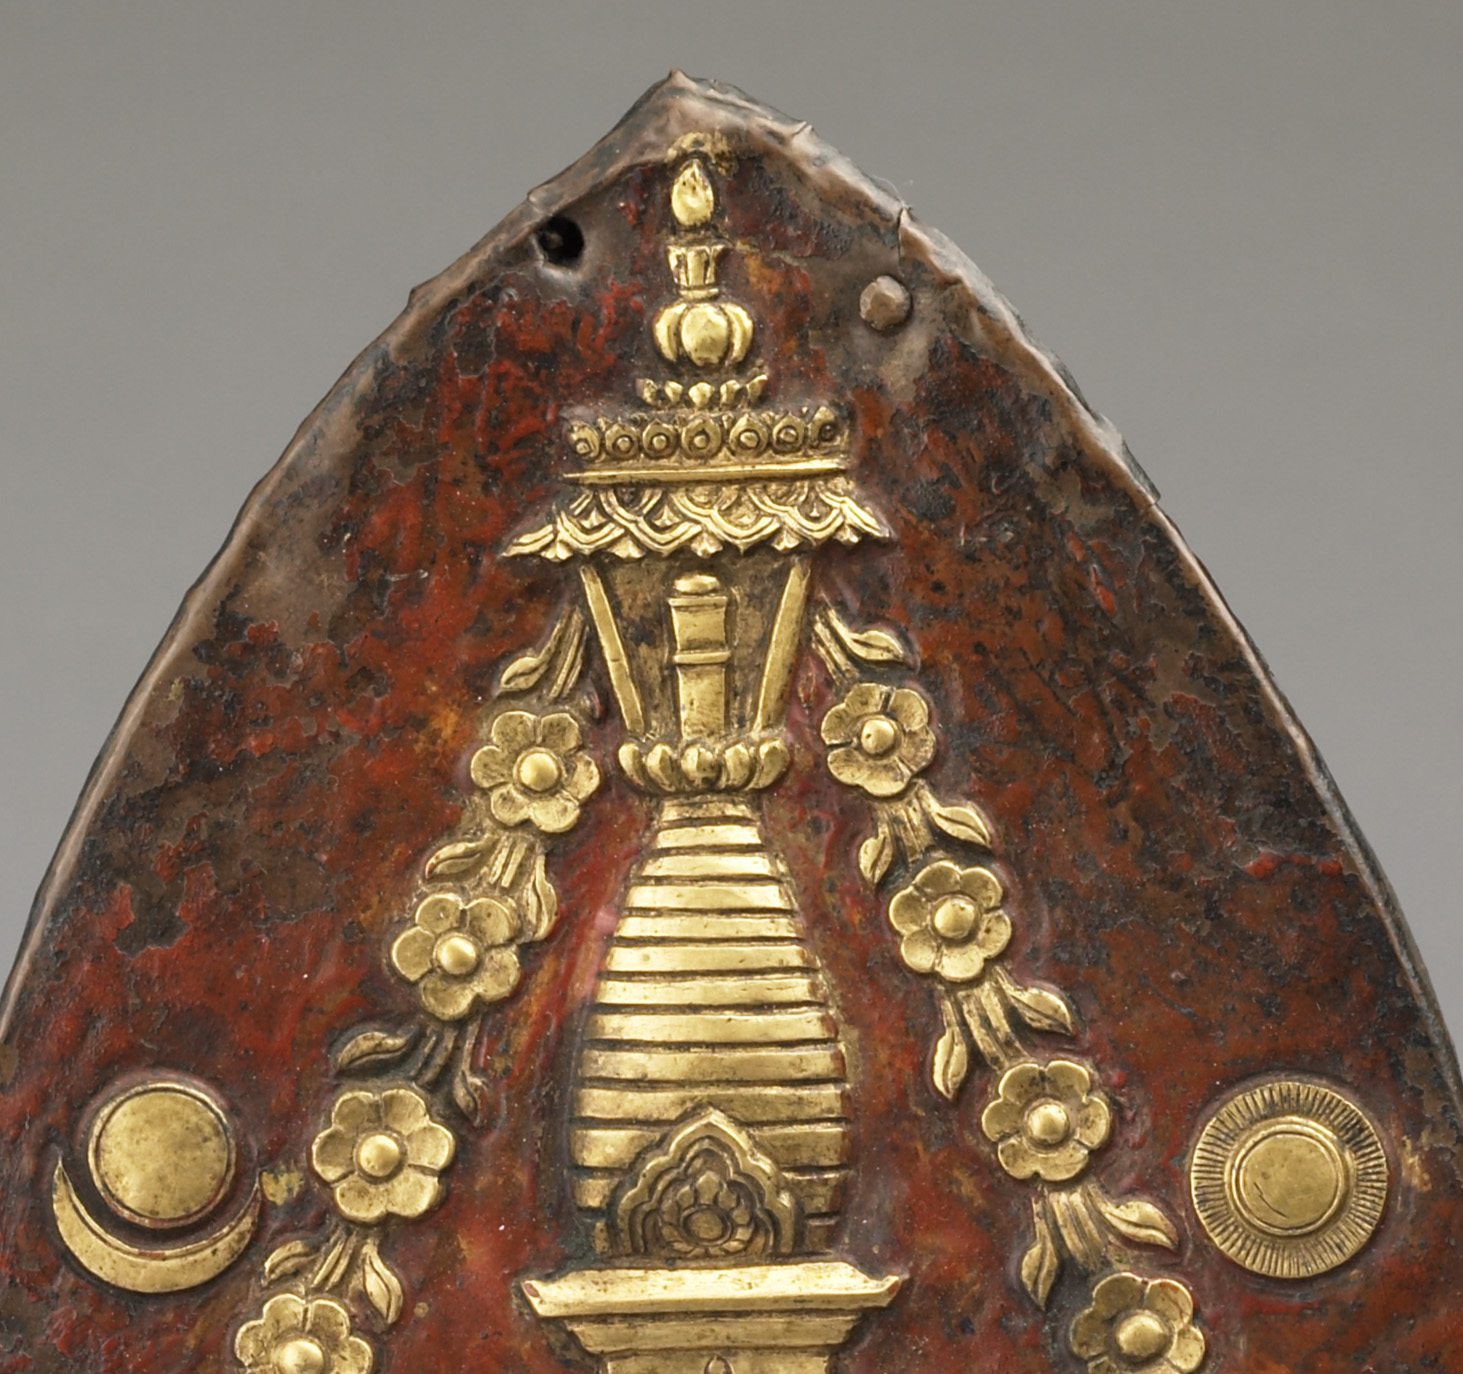 Plaque finial depicting stupa with flower garlands descending from canopy and moon and sun motifs